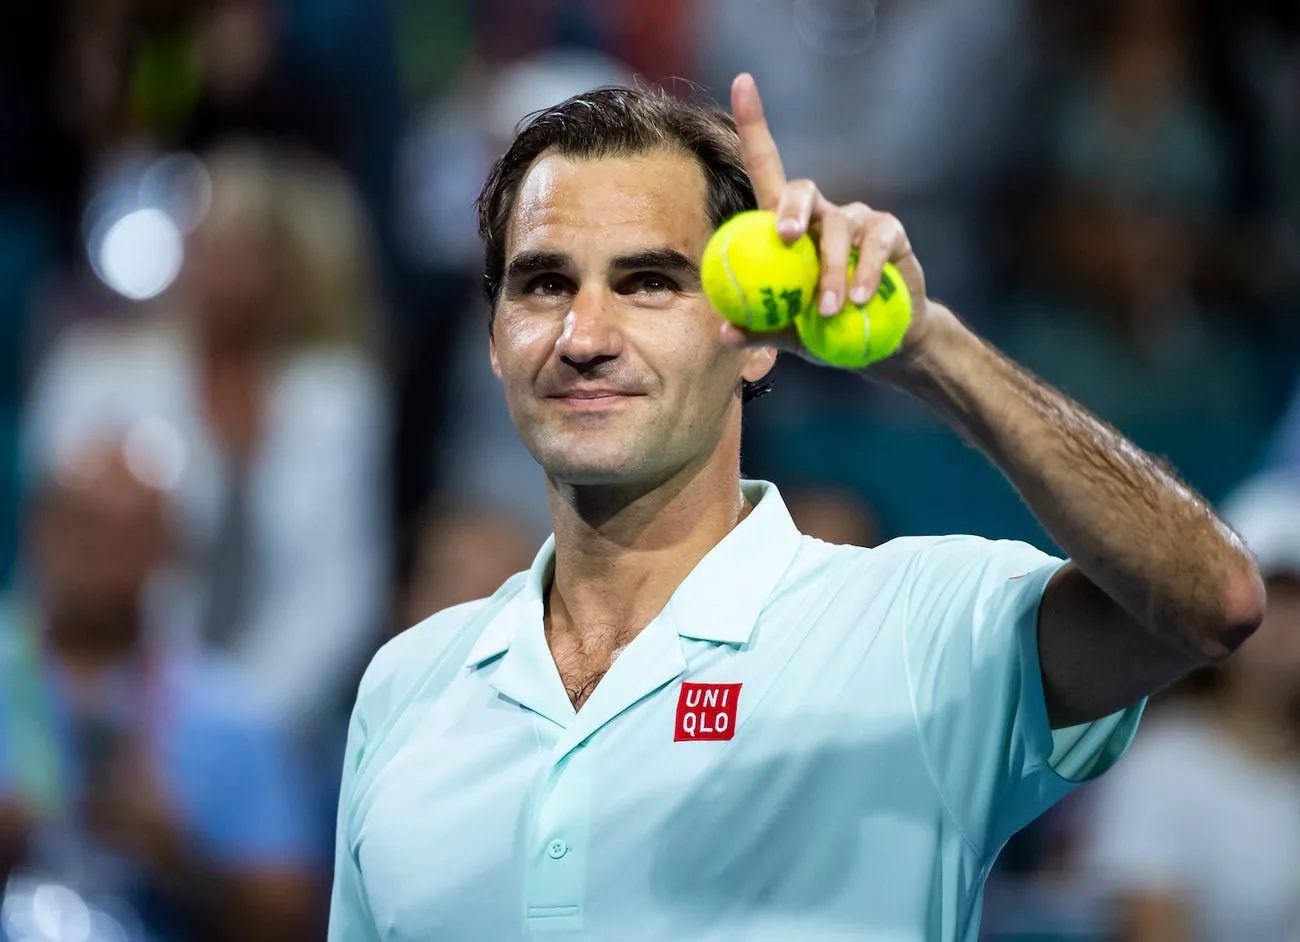 Roger Federer will reportedly end up being the first billionaire in tennis in 2020